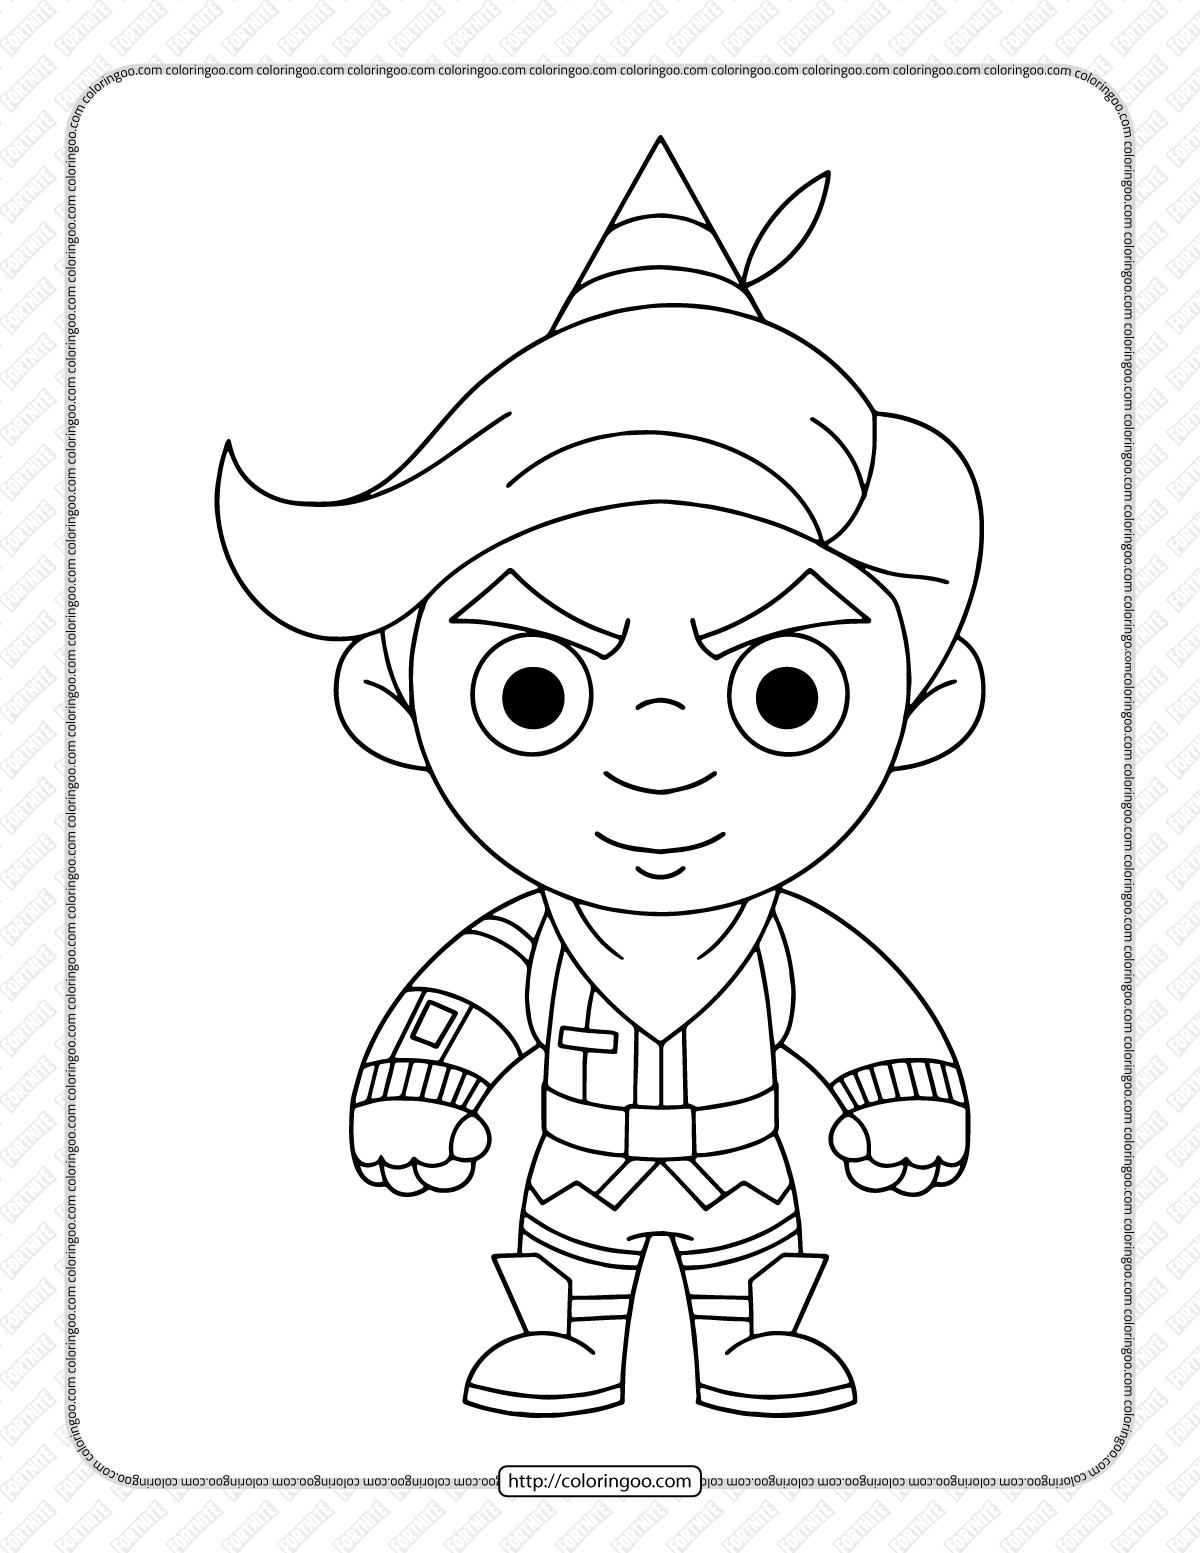 chibi fortnite coloring pages 27